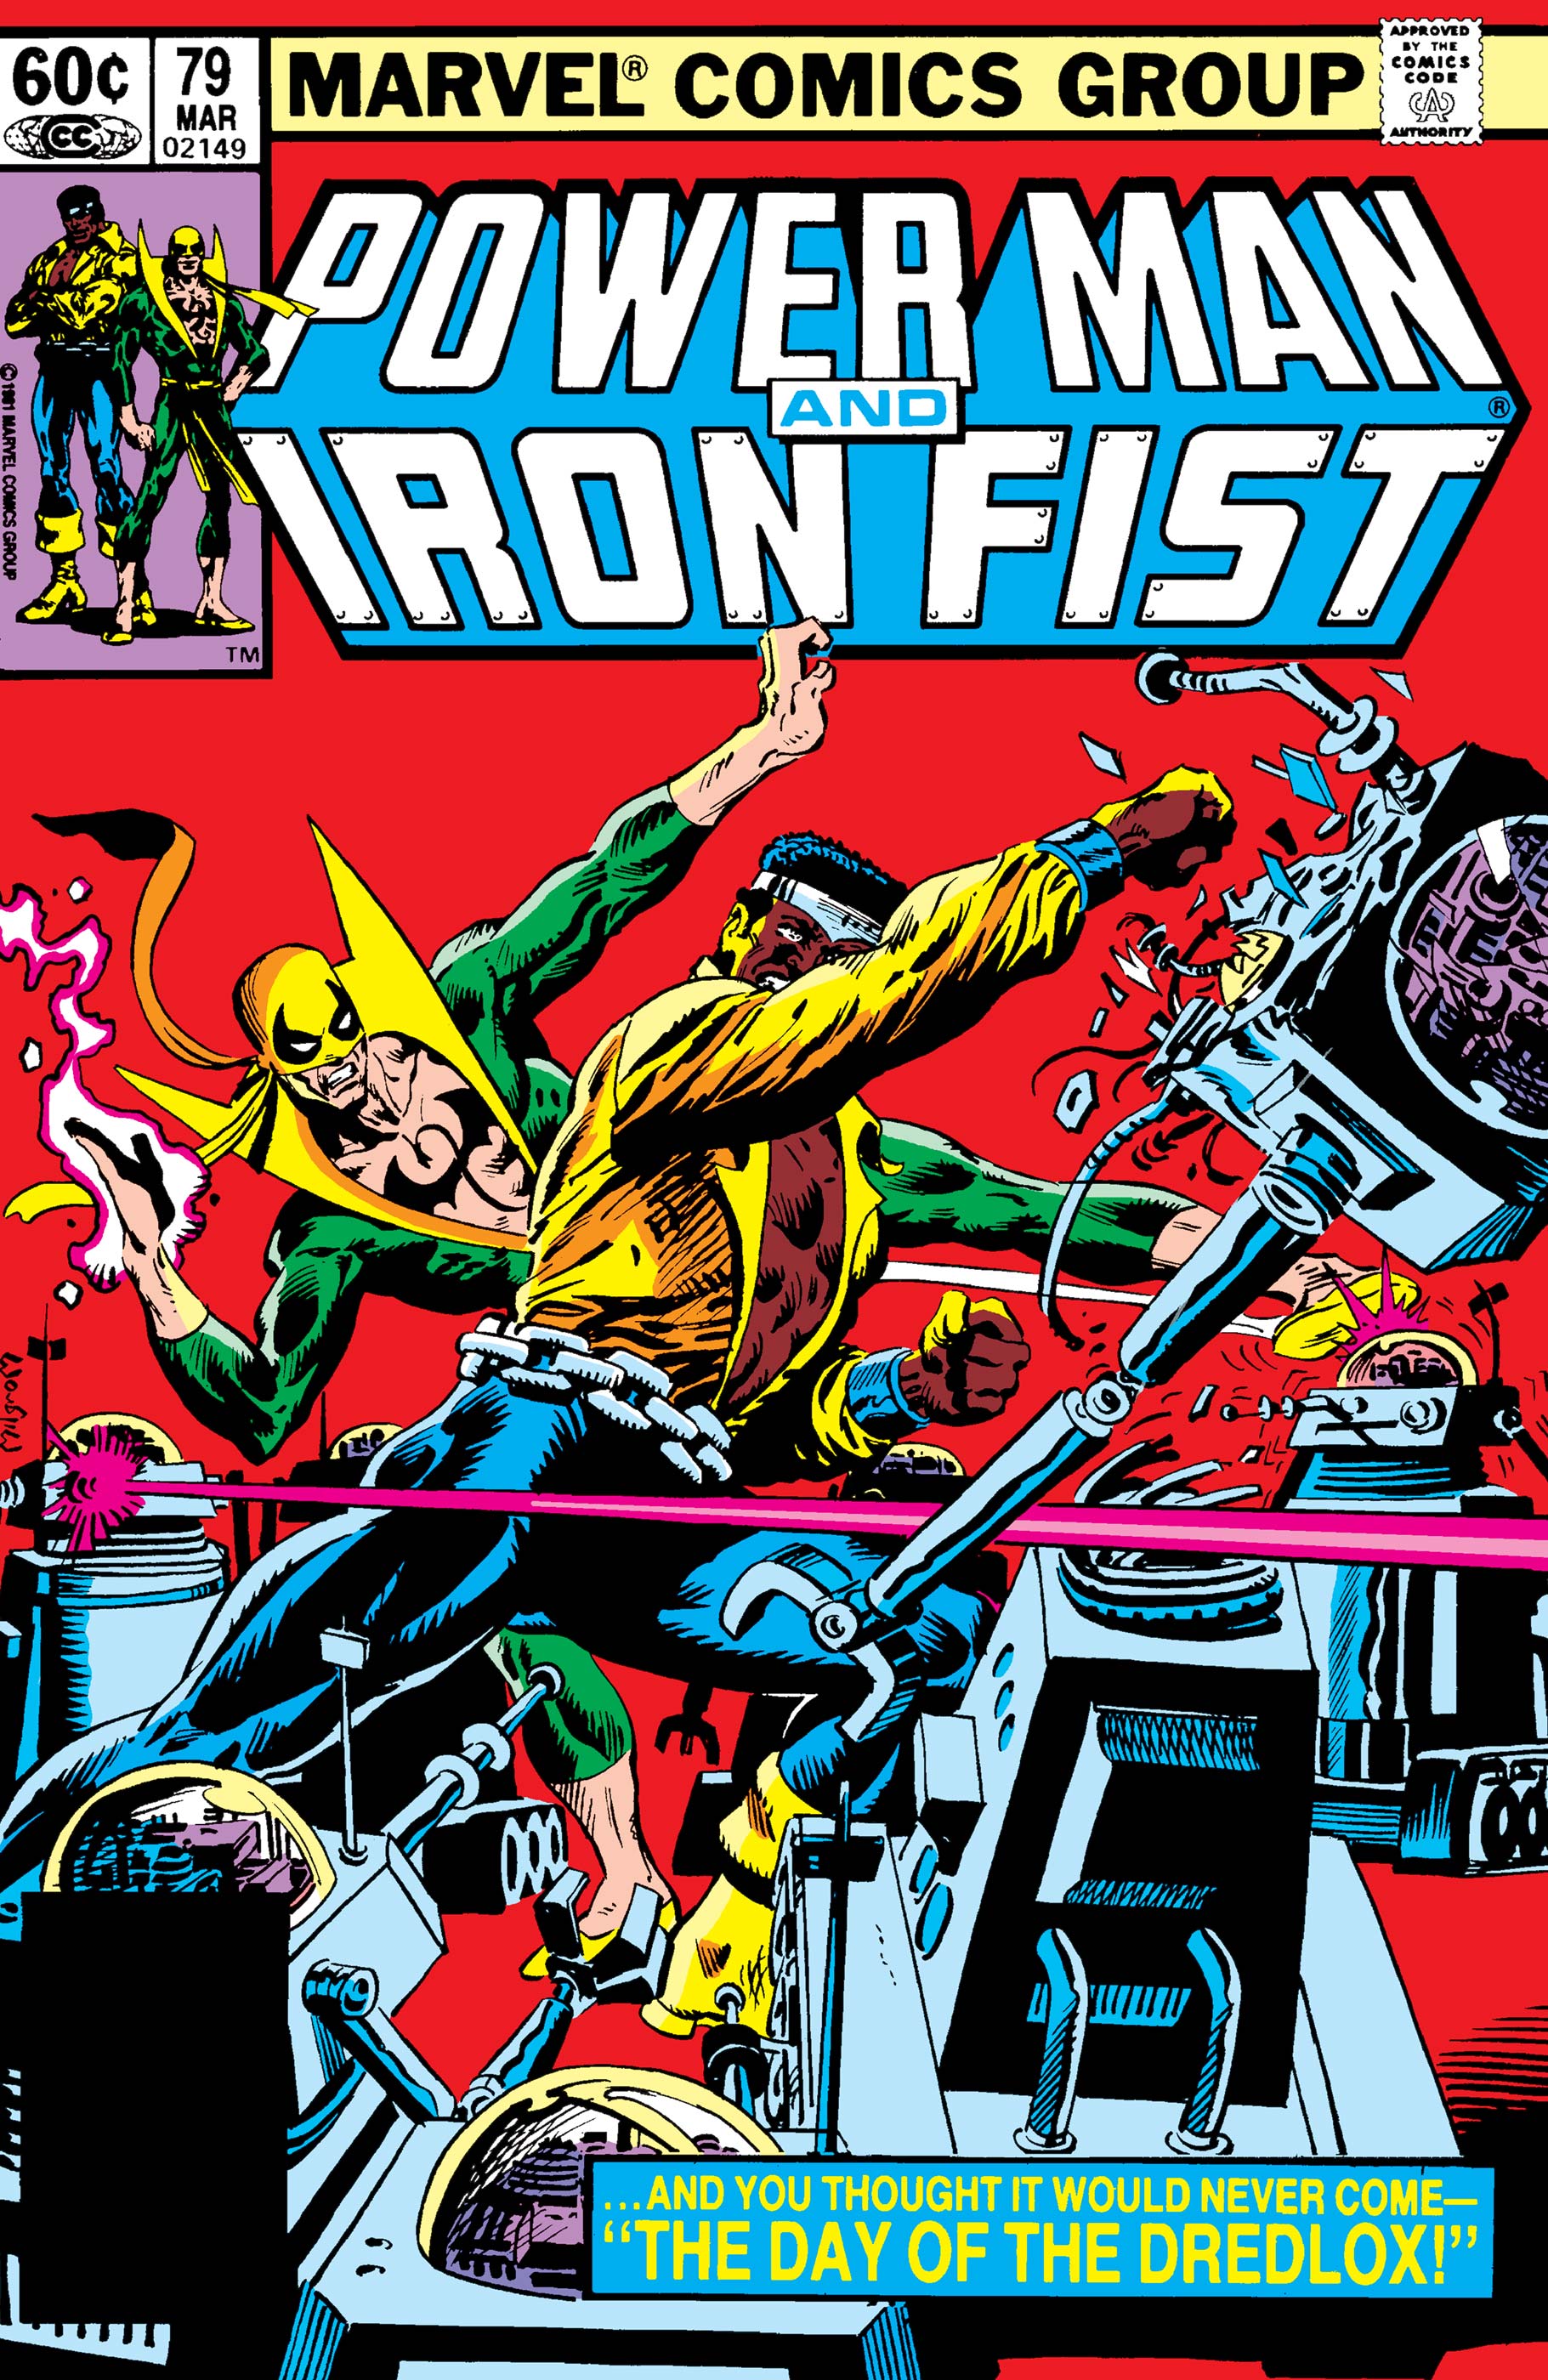 Power Man and Iron Fist (1978) #79